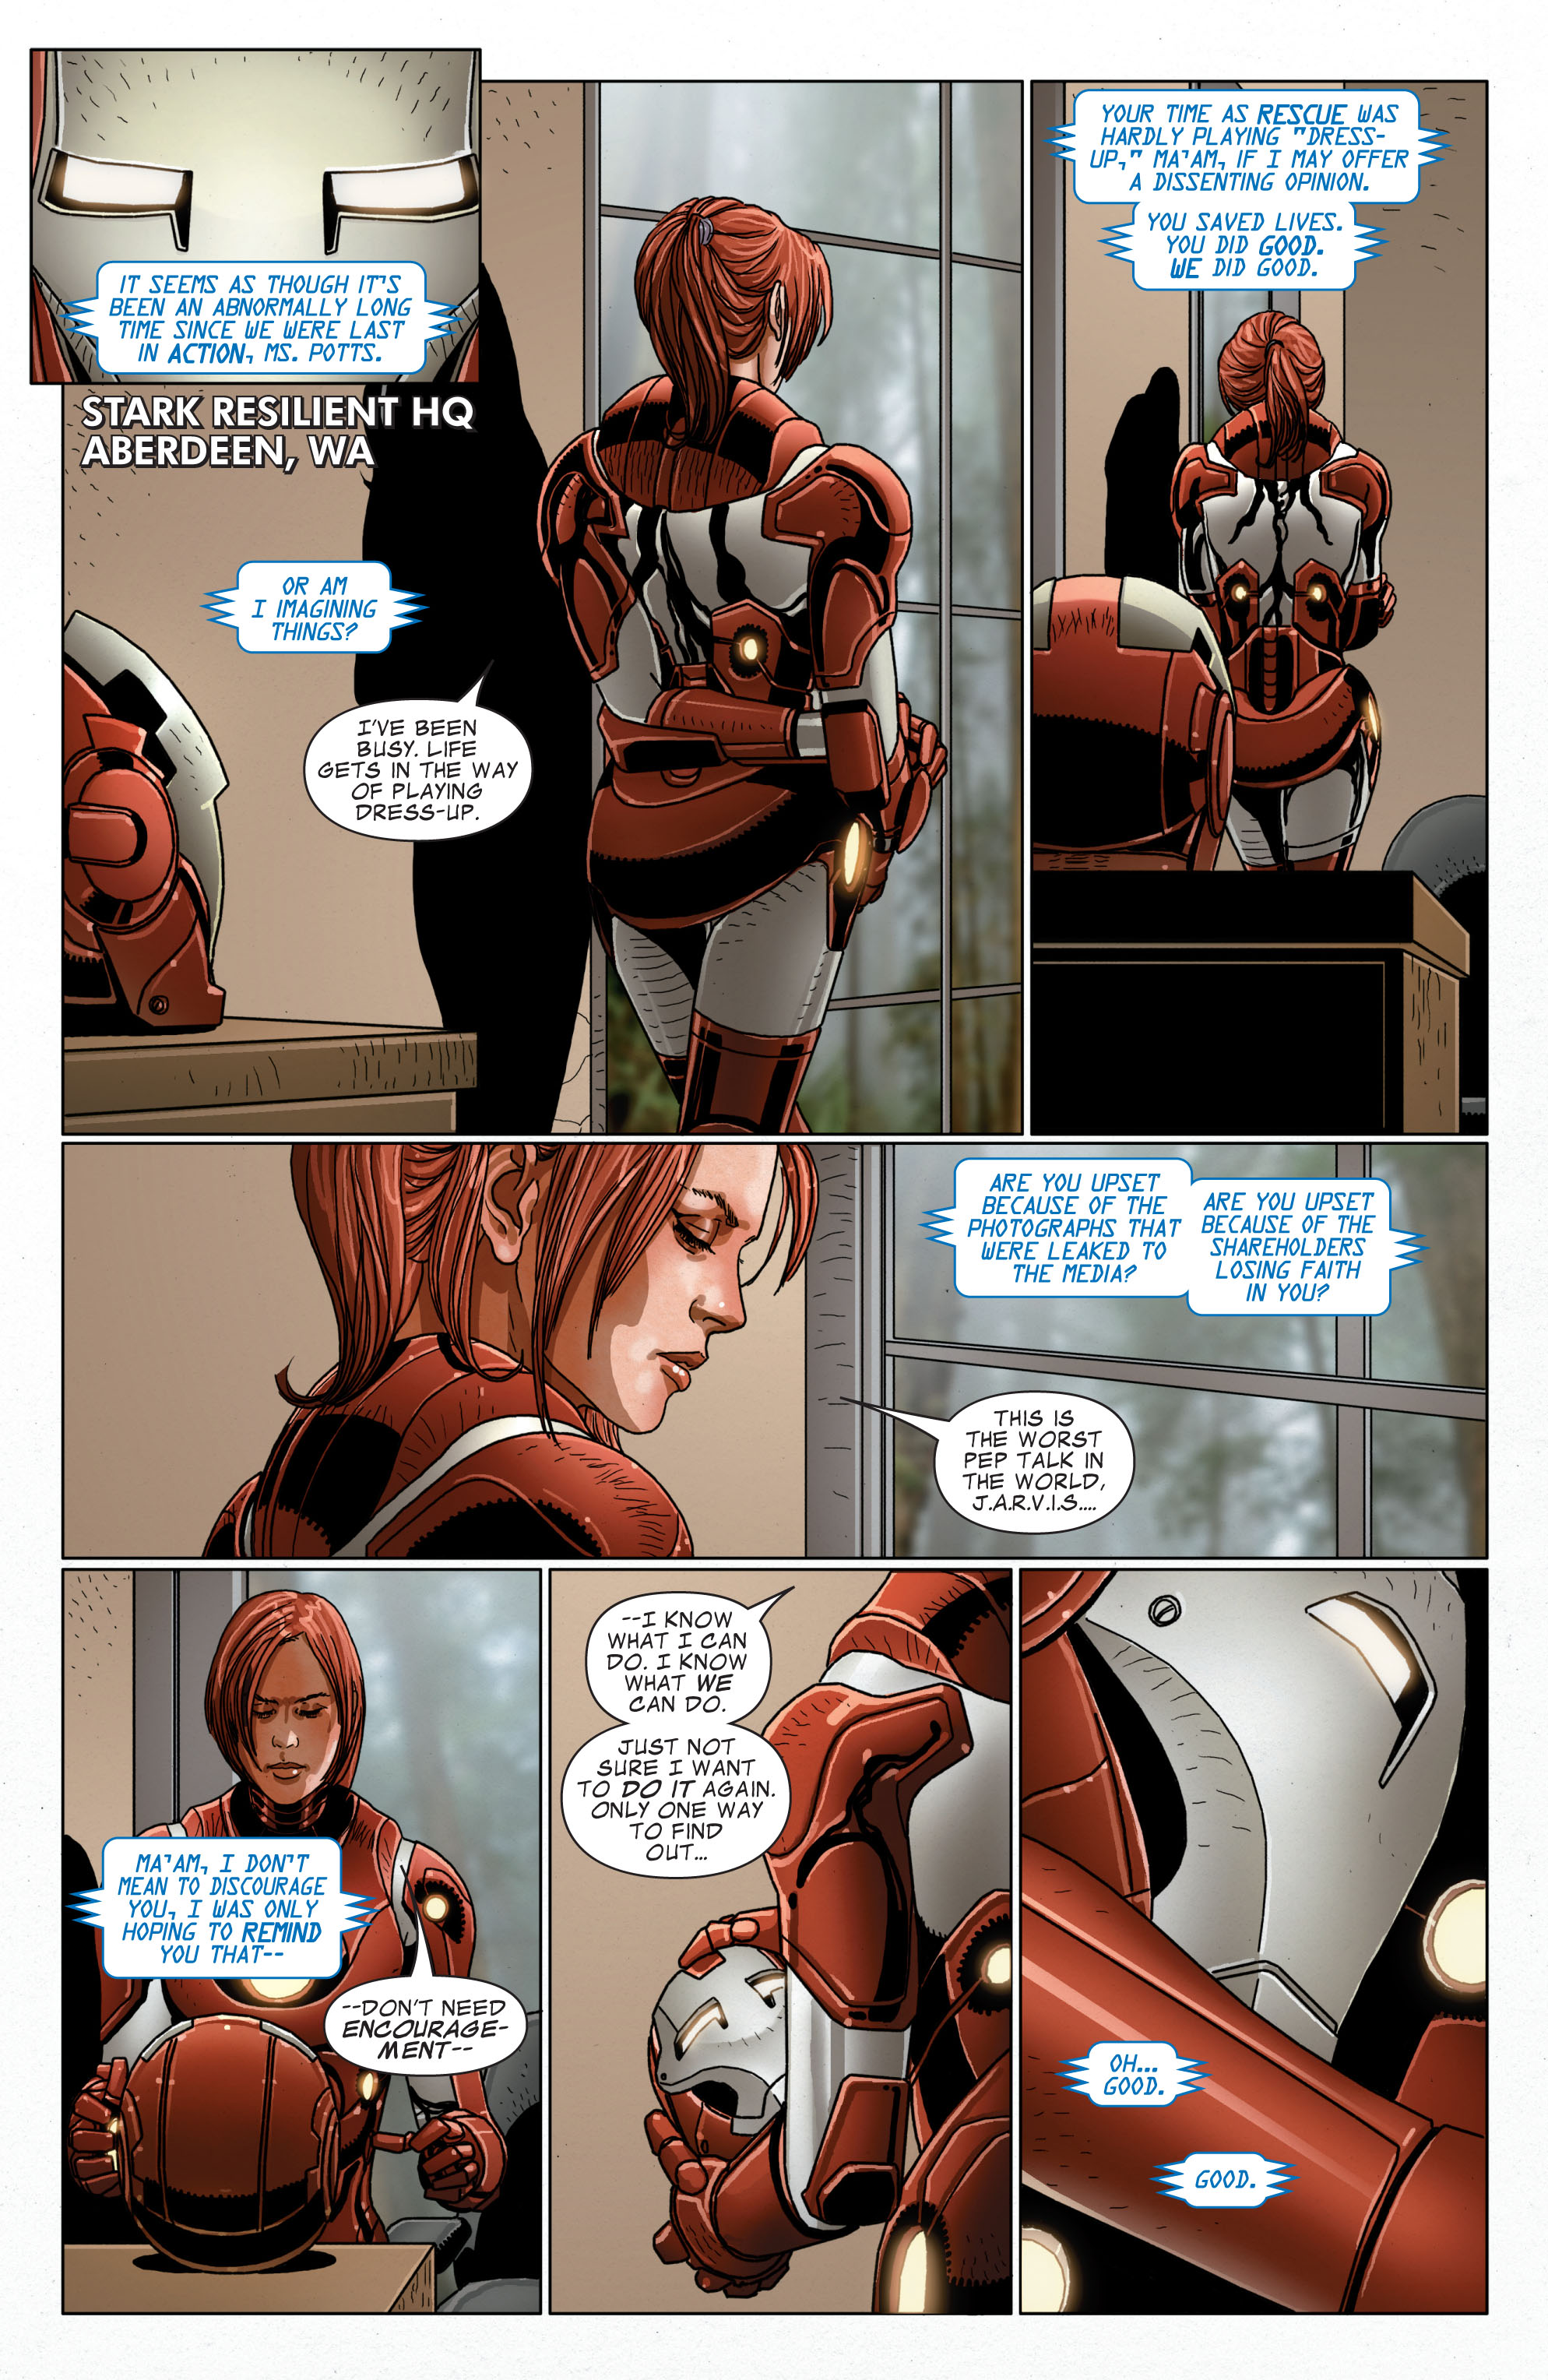 Invincible Iron Man (2008) 515 Page 5